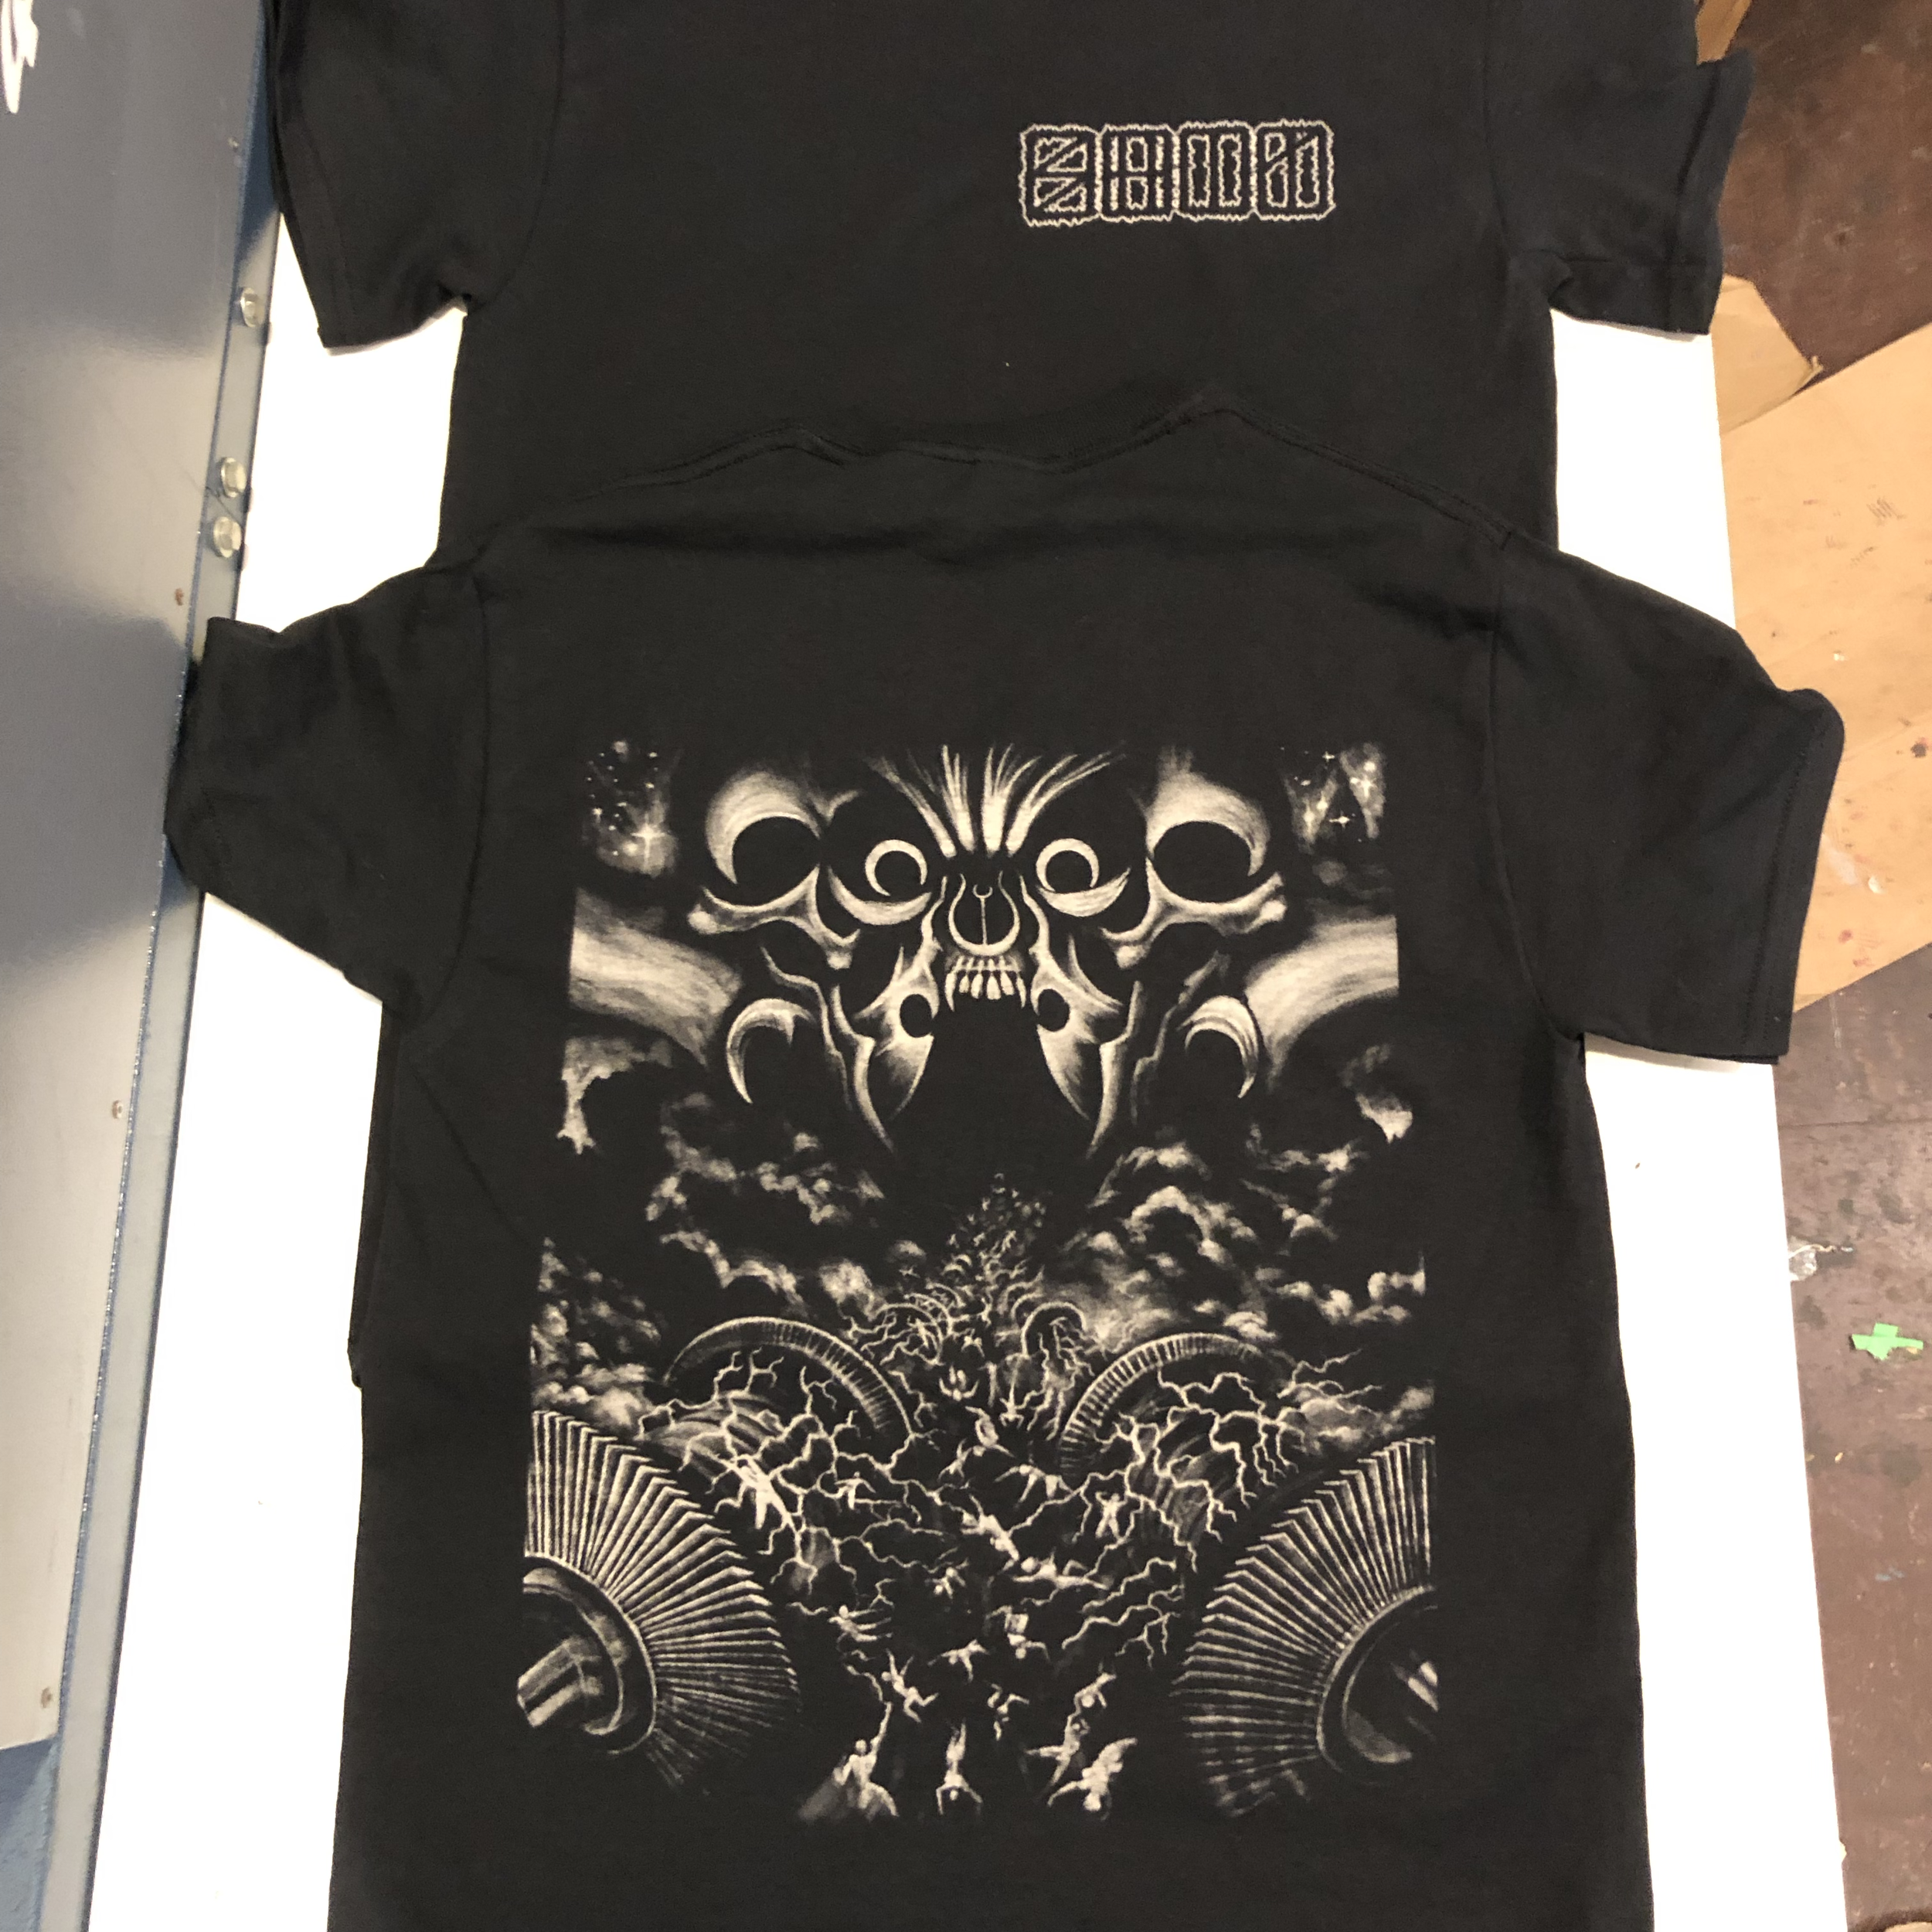  2-sided discharge print for S.H.I.T. from Toronto, ON. 2019 